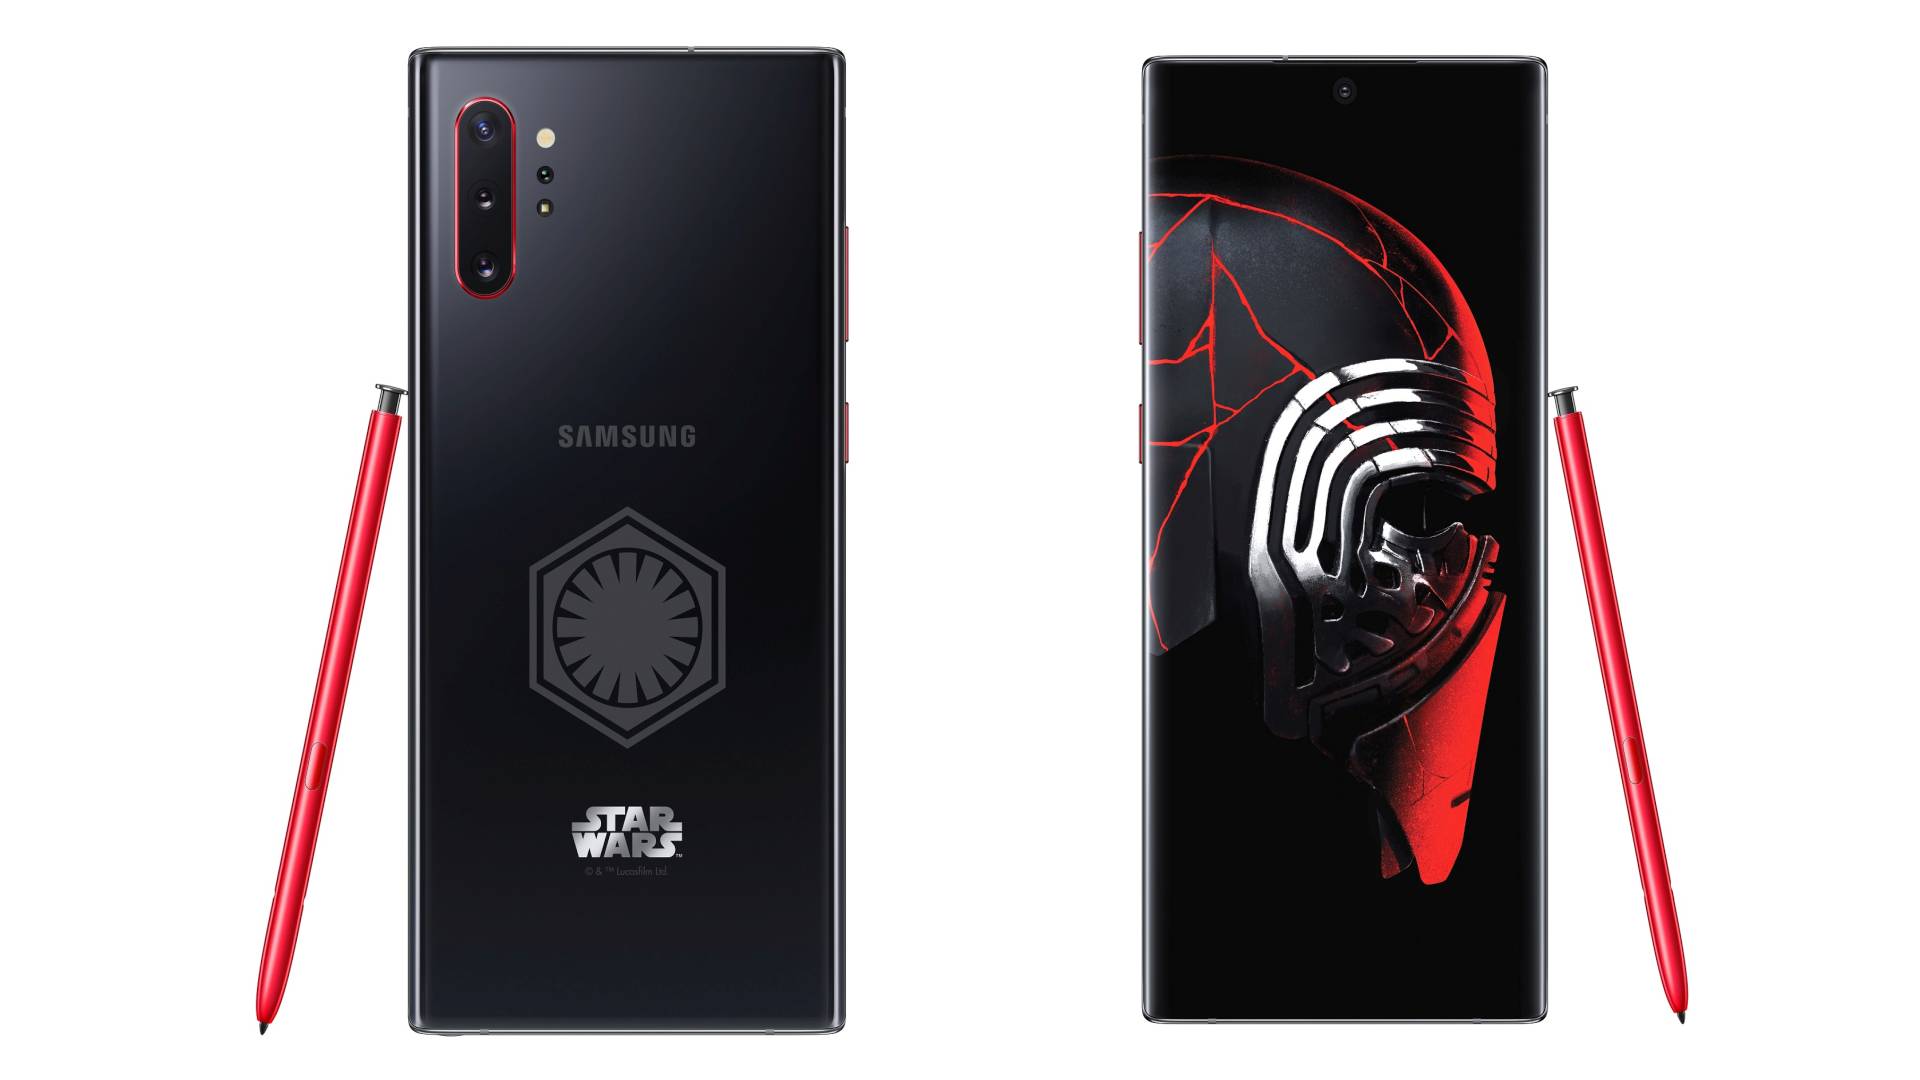 Galaxy note edition. Samsung Galaxy Note 10 Plus Star Wars. Samsung Note 10 Star Wars Edition. Samsung Galaxy Note 10+ Star Wars Special Edition. Samsung Galaxy Note 10 Limited Edition.